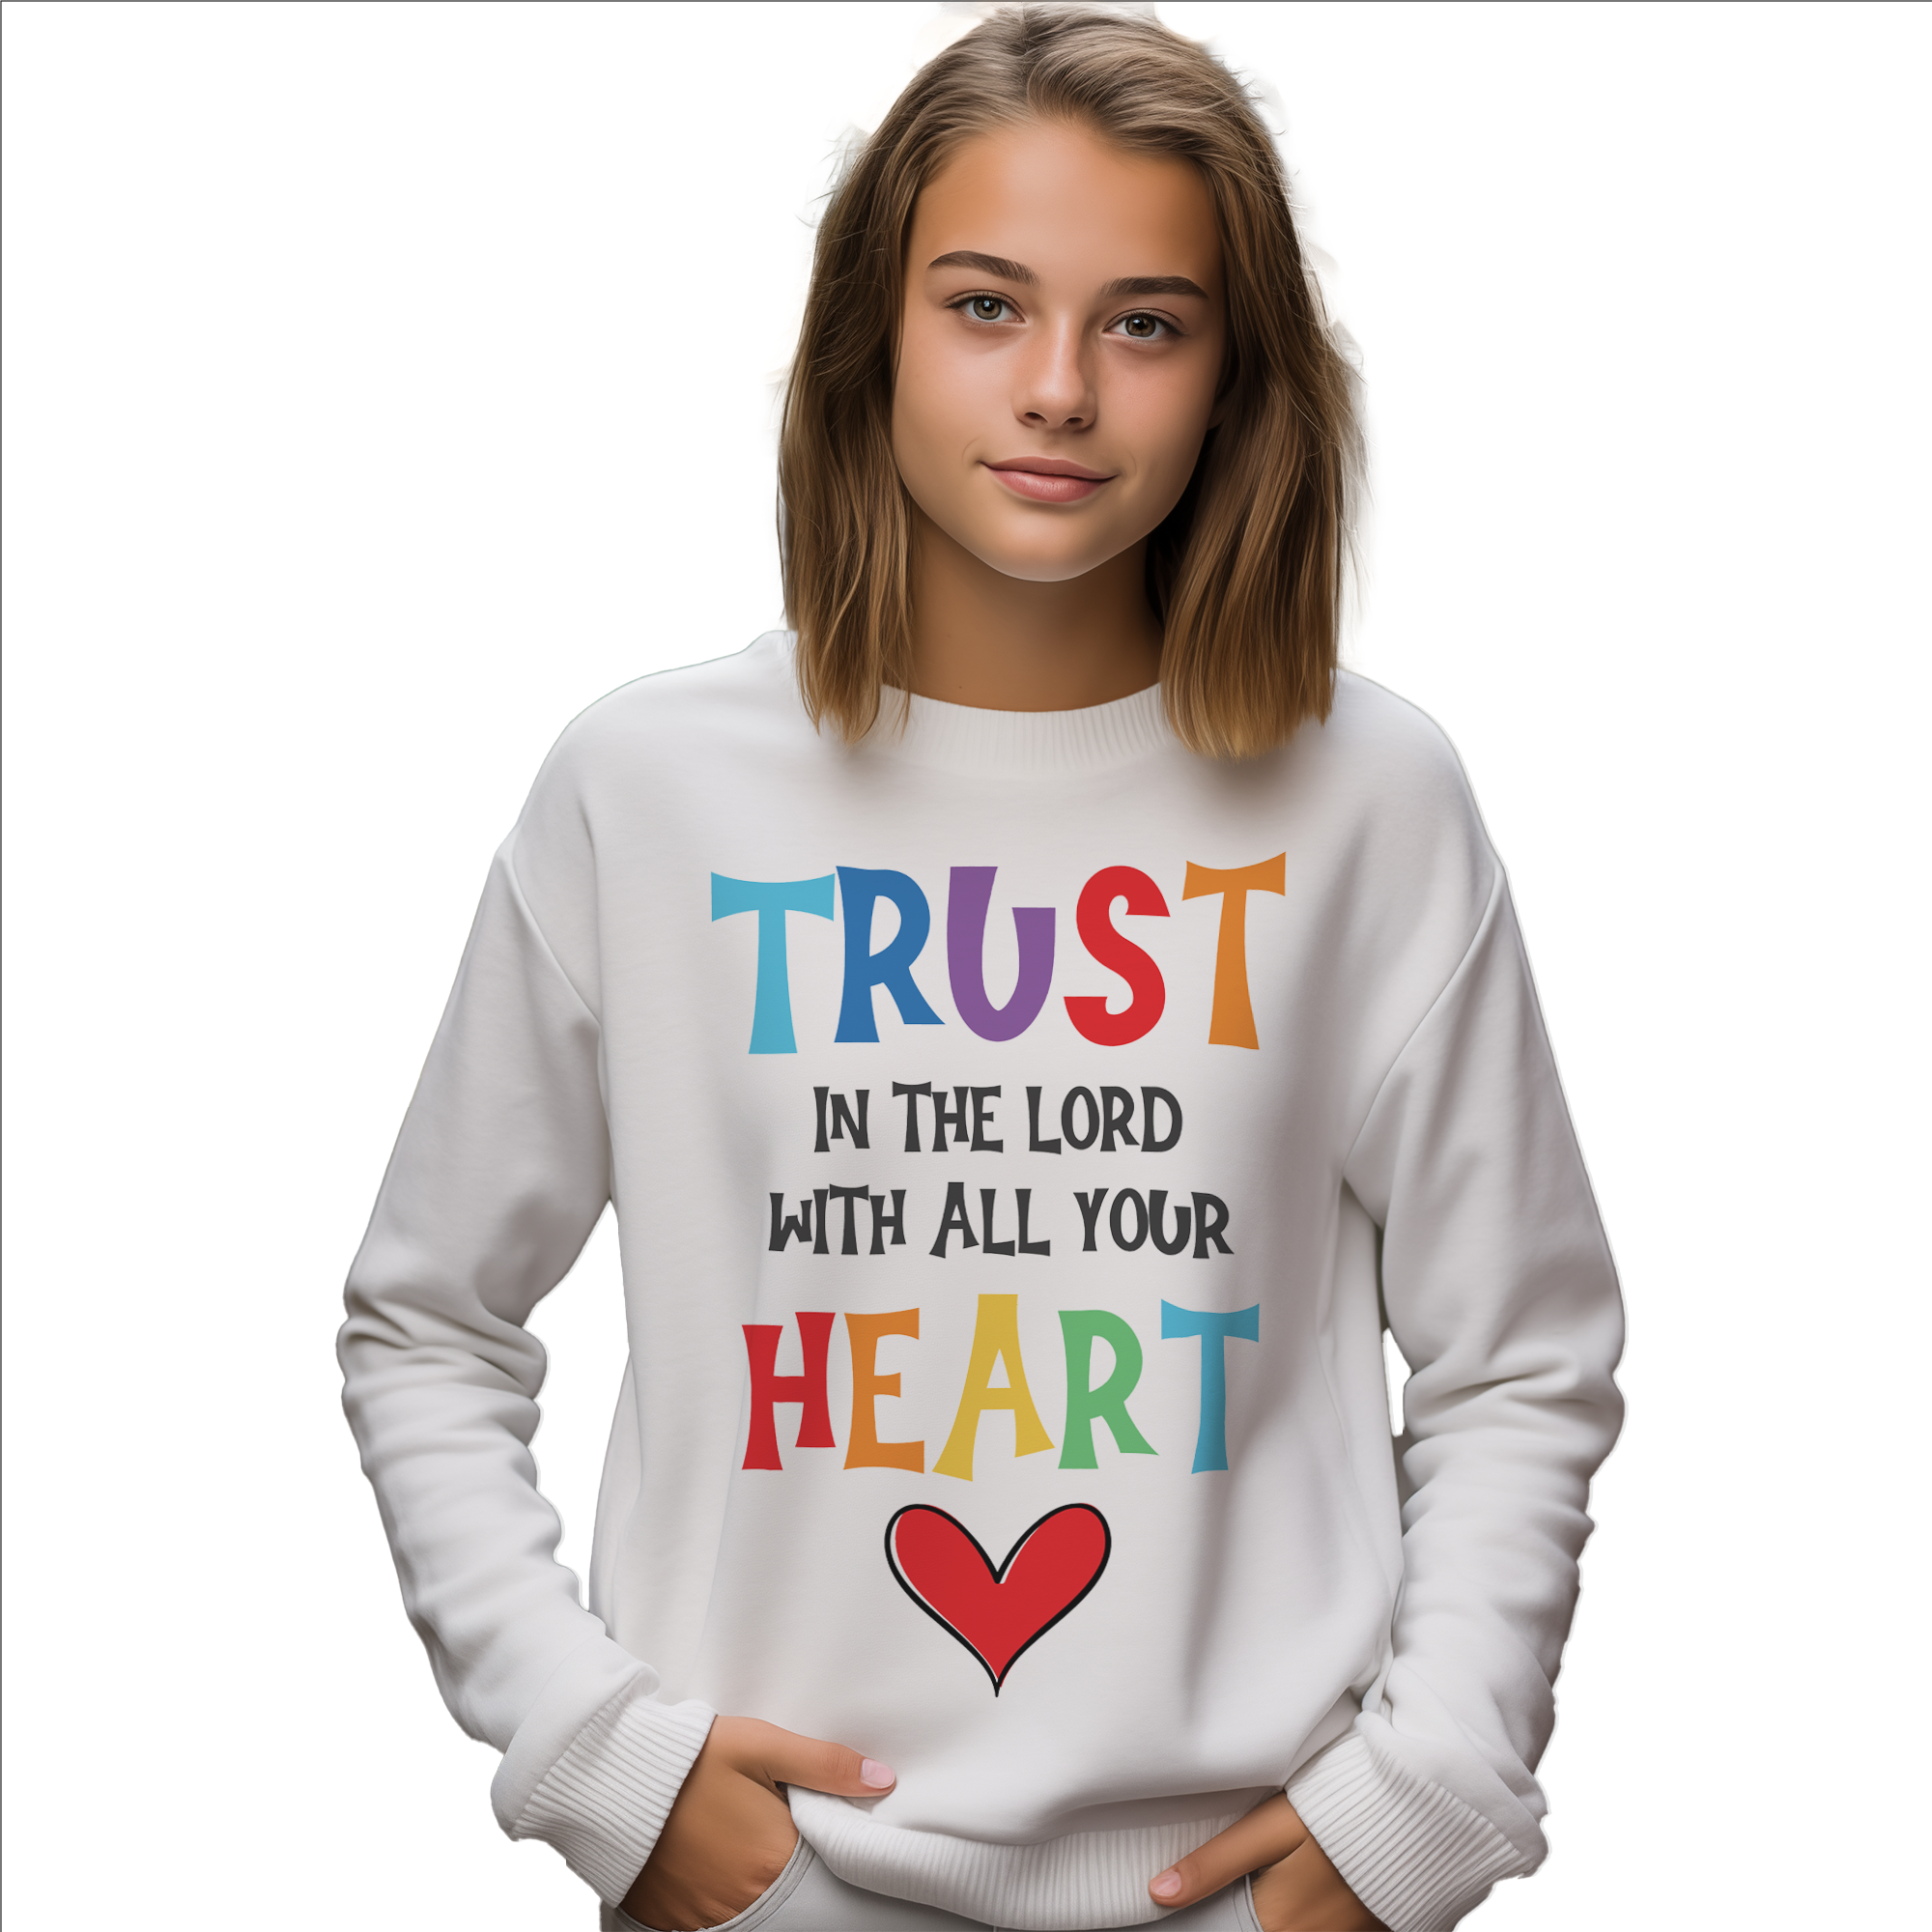 Trust in the Lord Youth Crewneck Sweatshirt Color: White Size: XS Jesus Passion Apparel